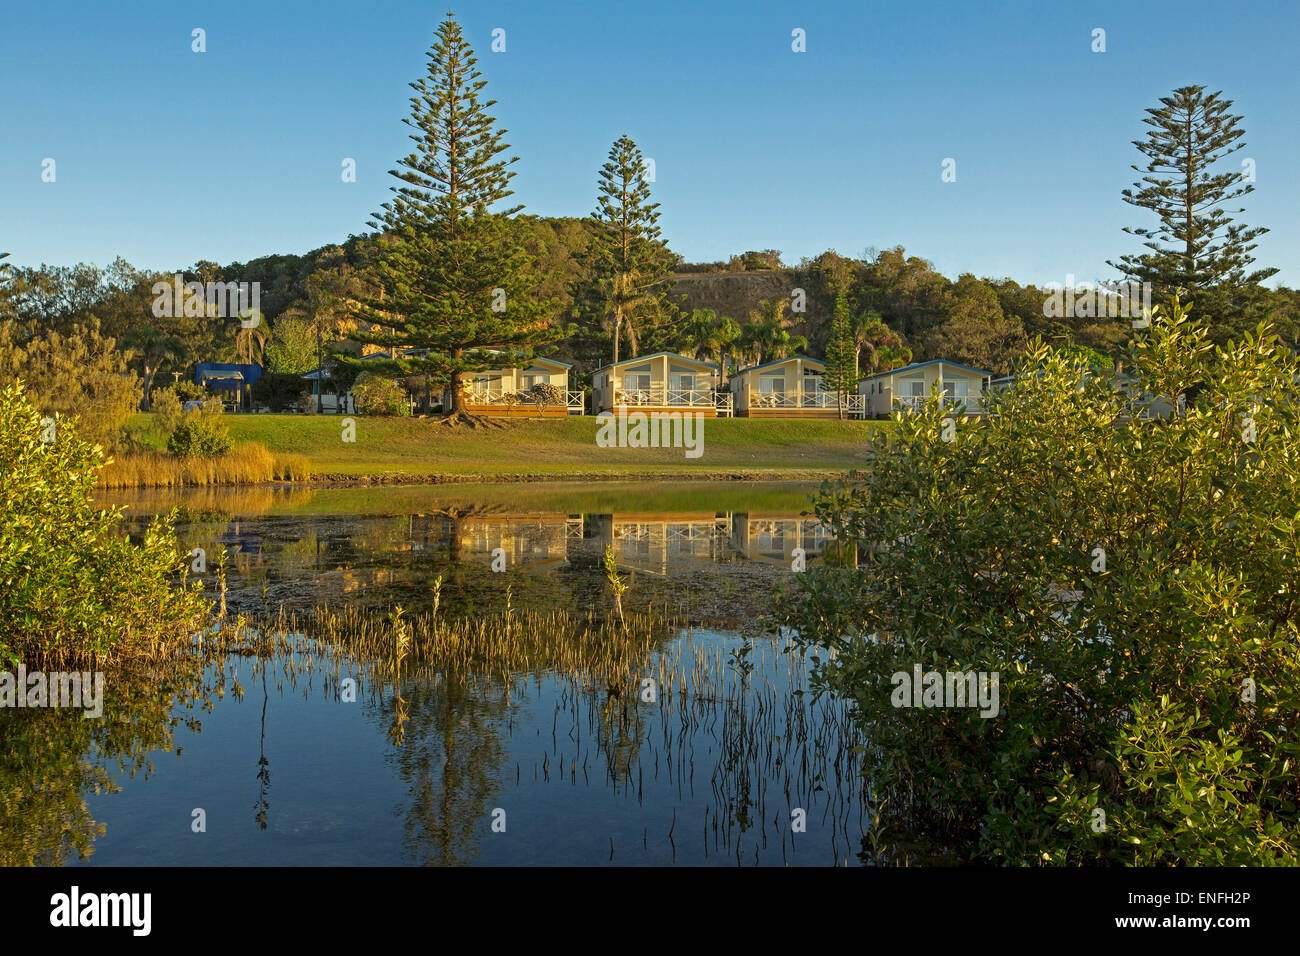 Waterfront holiday resort accommodation with blue sky and trees reflected in calm water of lake at Nambucca Heads NSW Australia Stock Photo